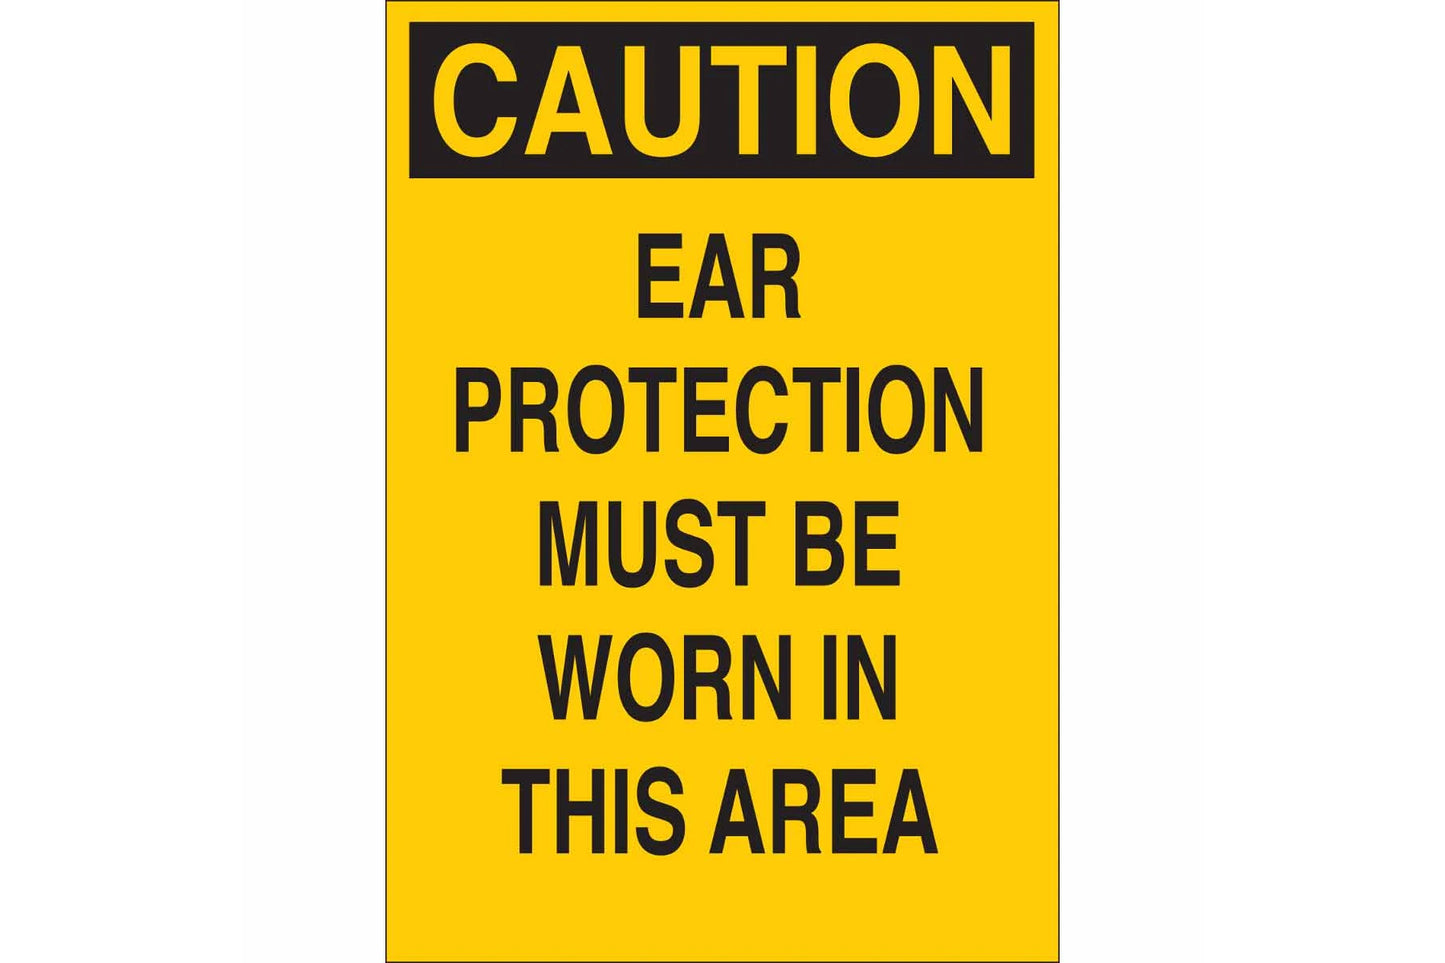 CAUTION Ear Protection Must Be Worn In This Area Sign